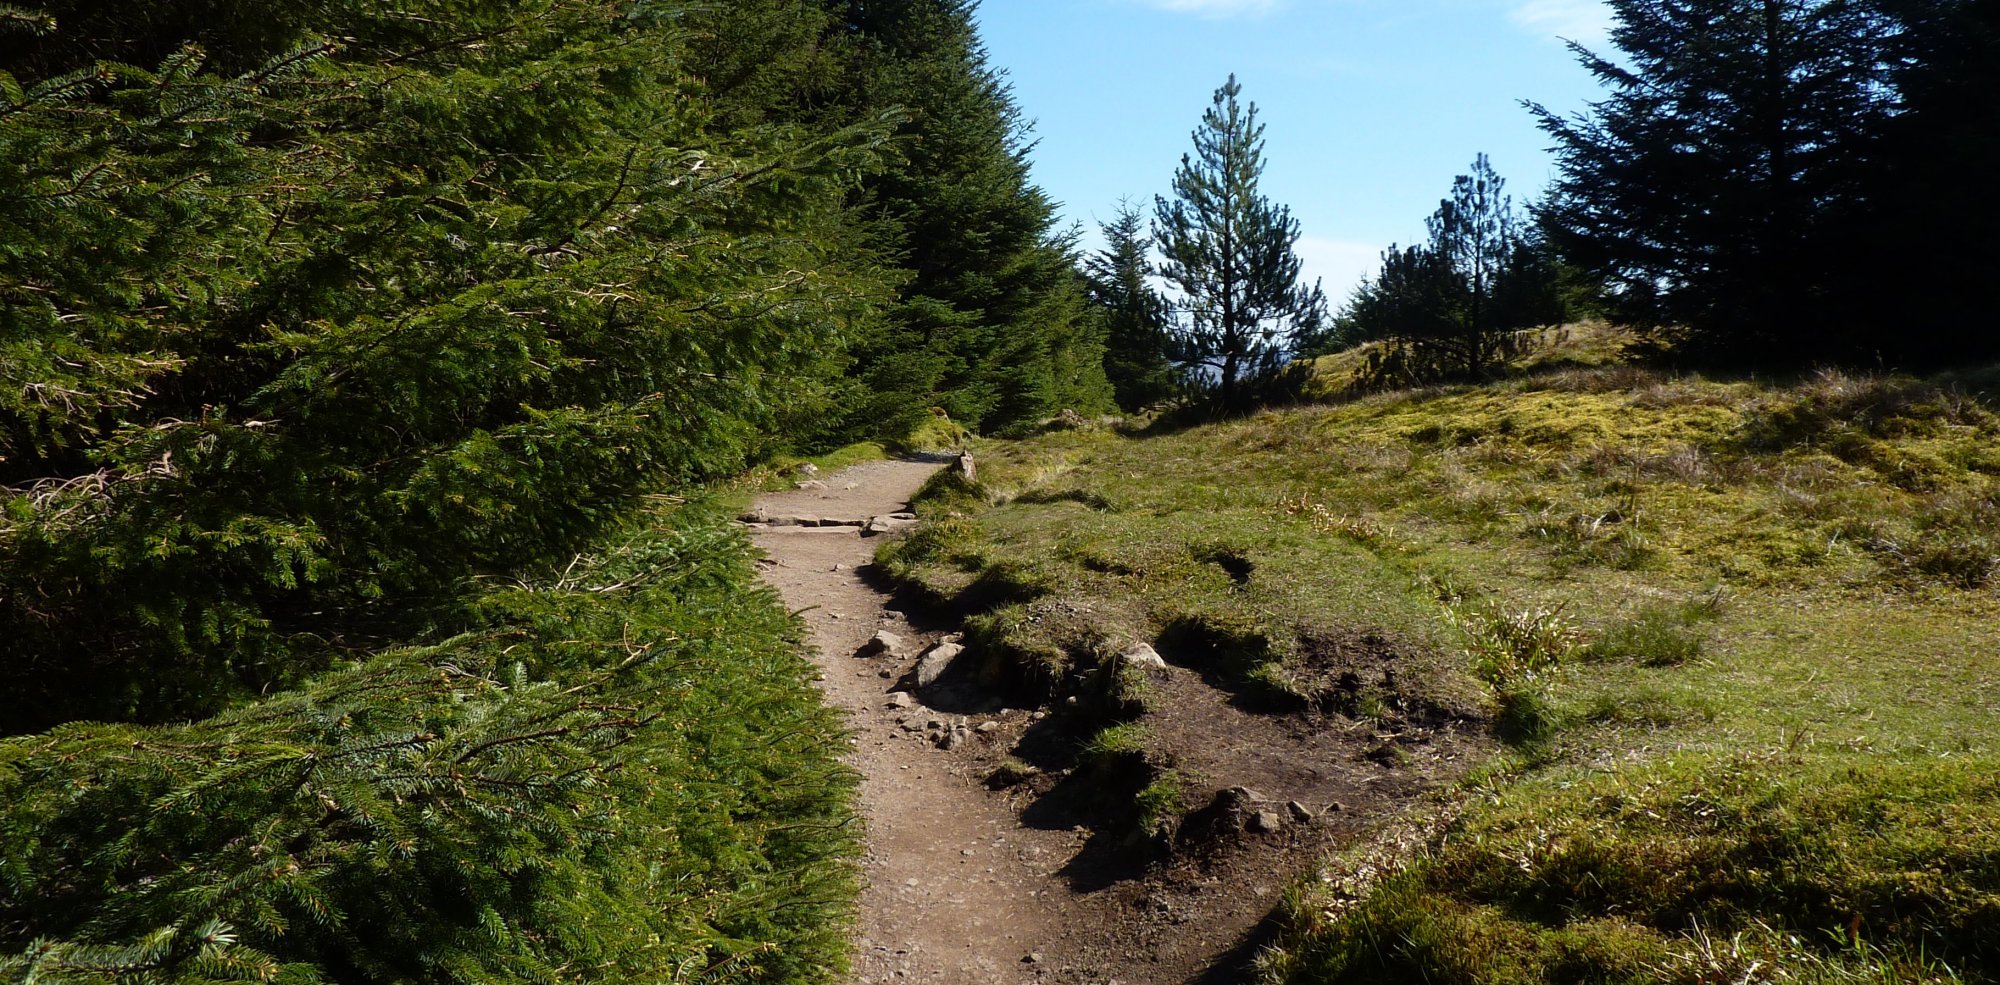 Following the lovely path through the trees down from the Old Man of Storr to the car park